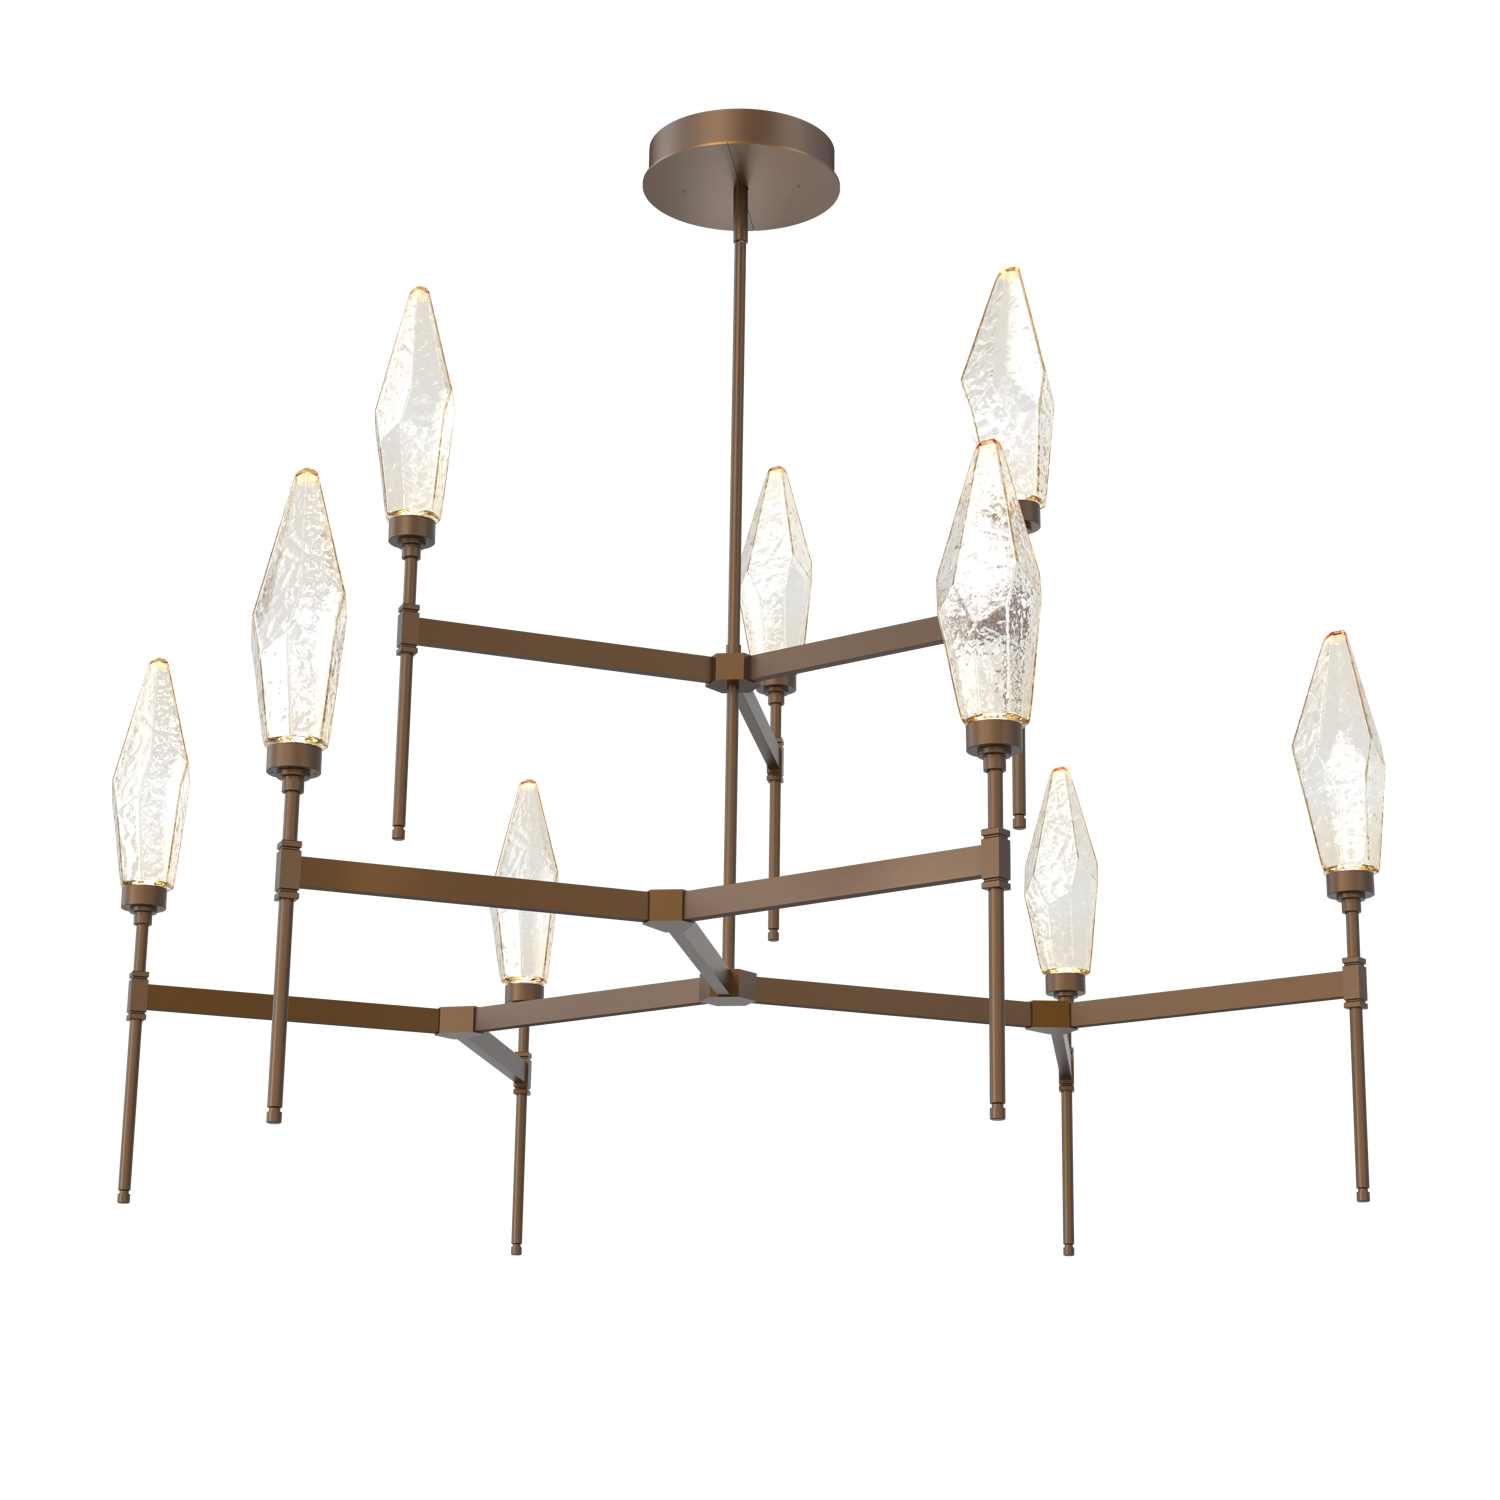 CHB0050-54-FB-CA-Hammerton-Studio-Rock-Crystal-54-inch-round-two-tier-belvedere-chandelier-with-flat-bronze-finish-and-chilled-amber-blown-glass-shades-and-LED-lamping